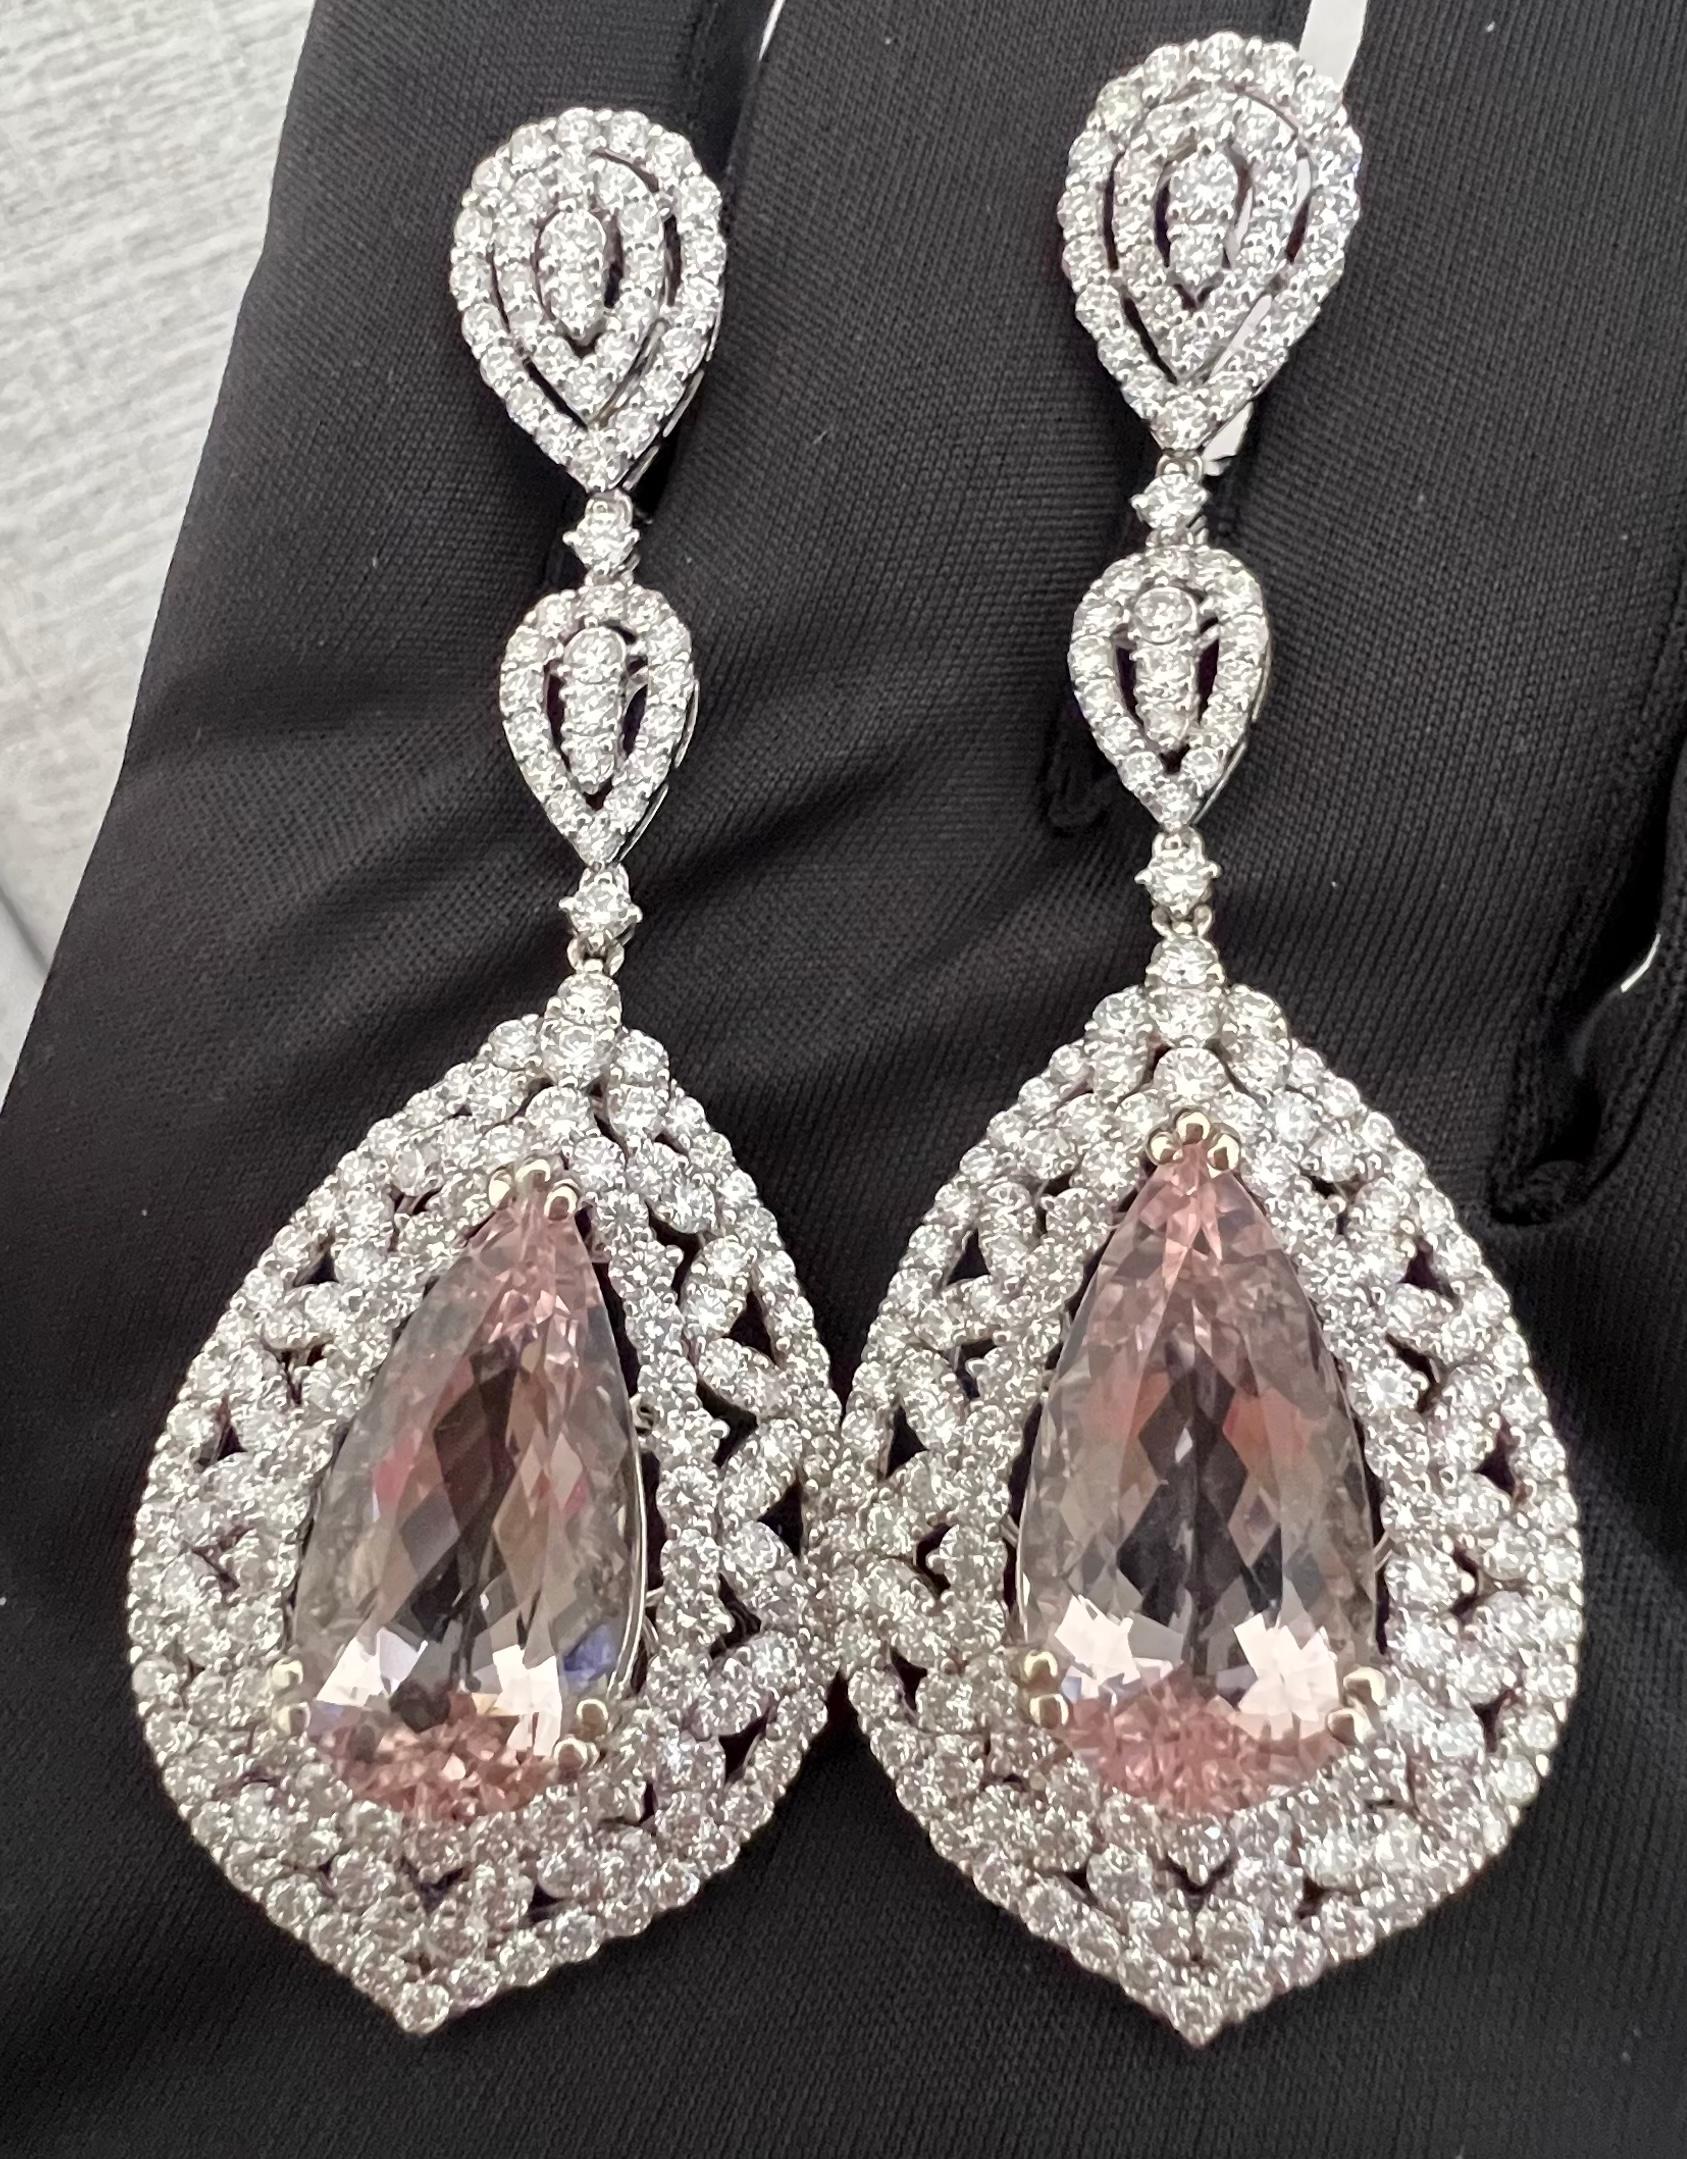 Exquisite 33.85 Carat Pink Morganite and Diamond Earrings in 18K White Gold In Excellent Condition For Sale In Tustin, CA